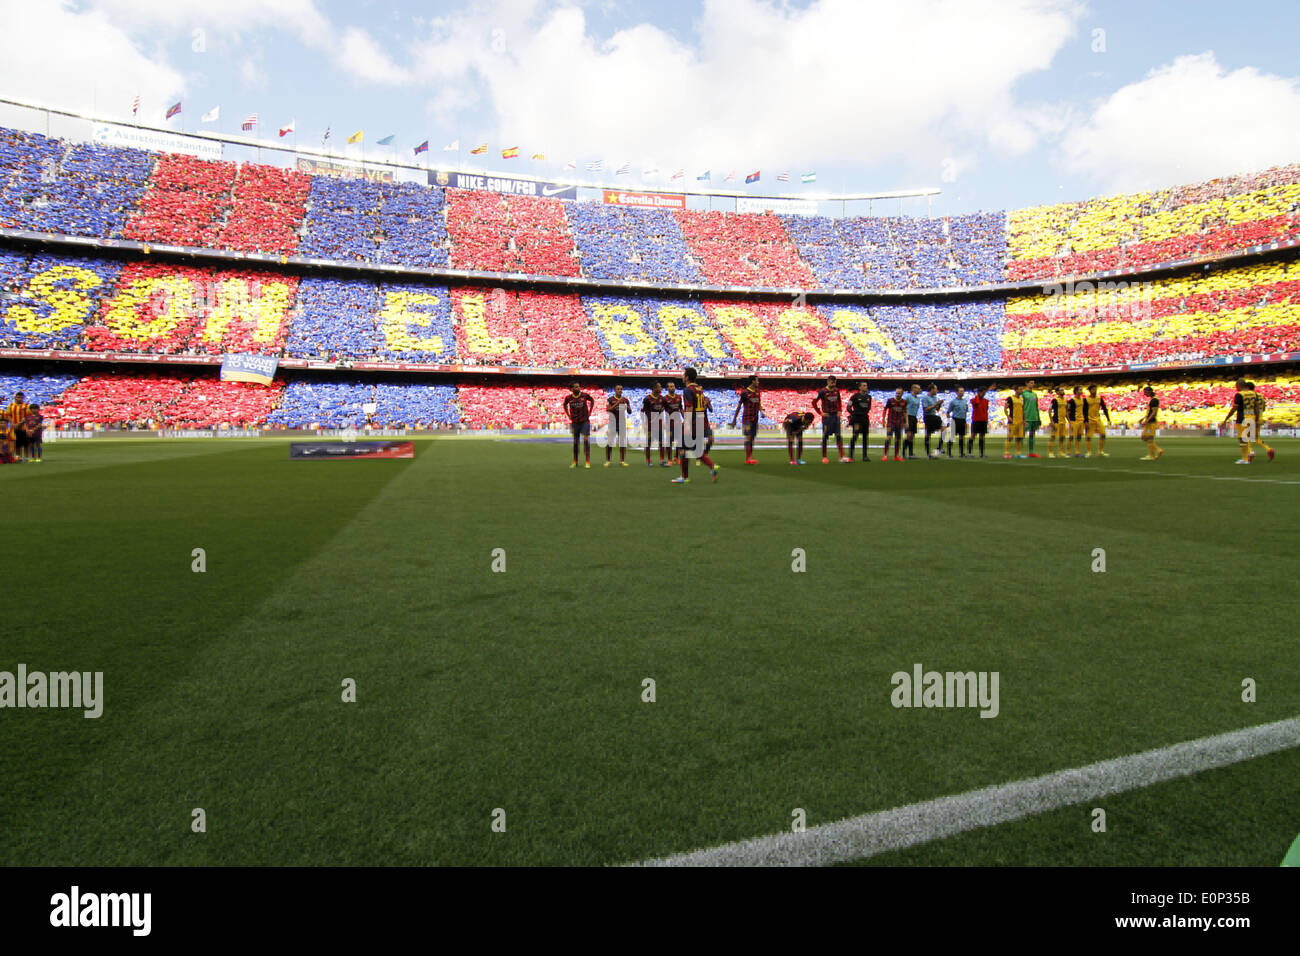 Barcelona, Spain. 17th May, 2014. catalan supporters in the match between FC Barcelona and Atletico de Madrid, for Week 38 of the spanish Liga BBVA played at the Camp Nou, May 17, 2014. Photo: Joan Valls/Urbanandsport/Nurphoto. Credit:  Joan Valls/NurPhoto/ZUMAPRESS.com/Alamy Live News Stock Photo